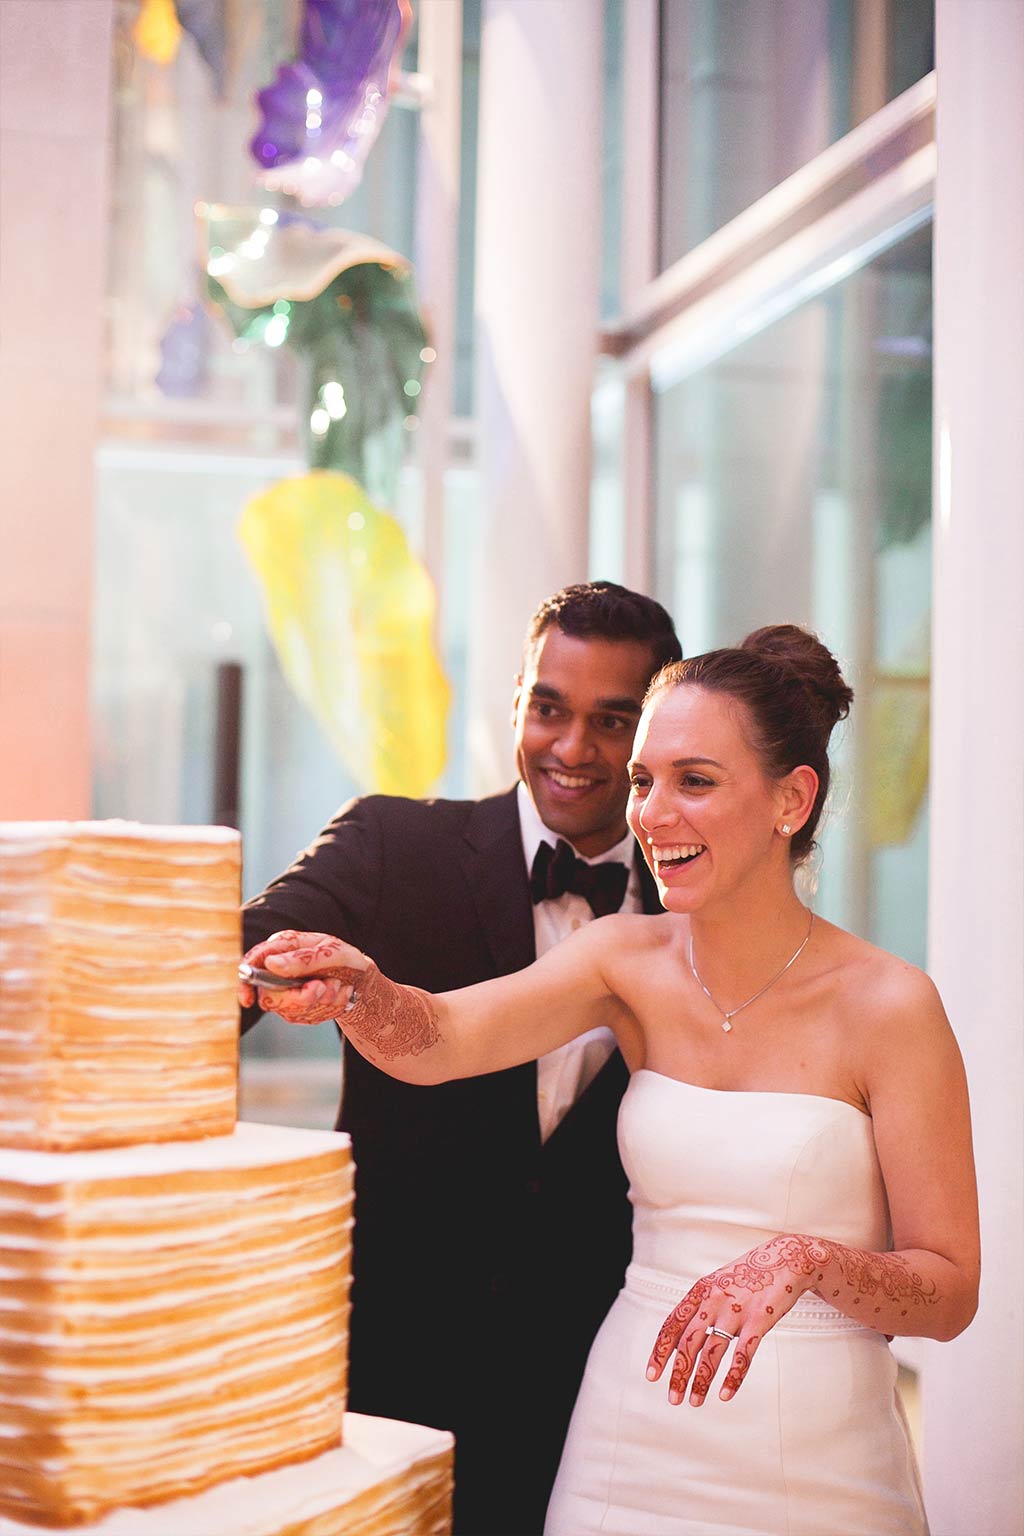 Bride and groom cutting Three Tier Square Wedding Cake by La Duni at Dallas Museum of Art